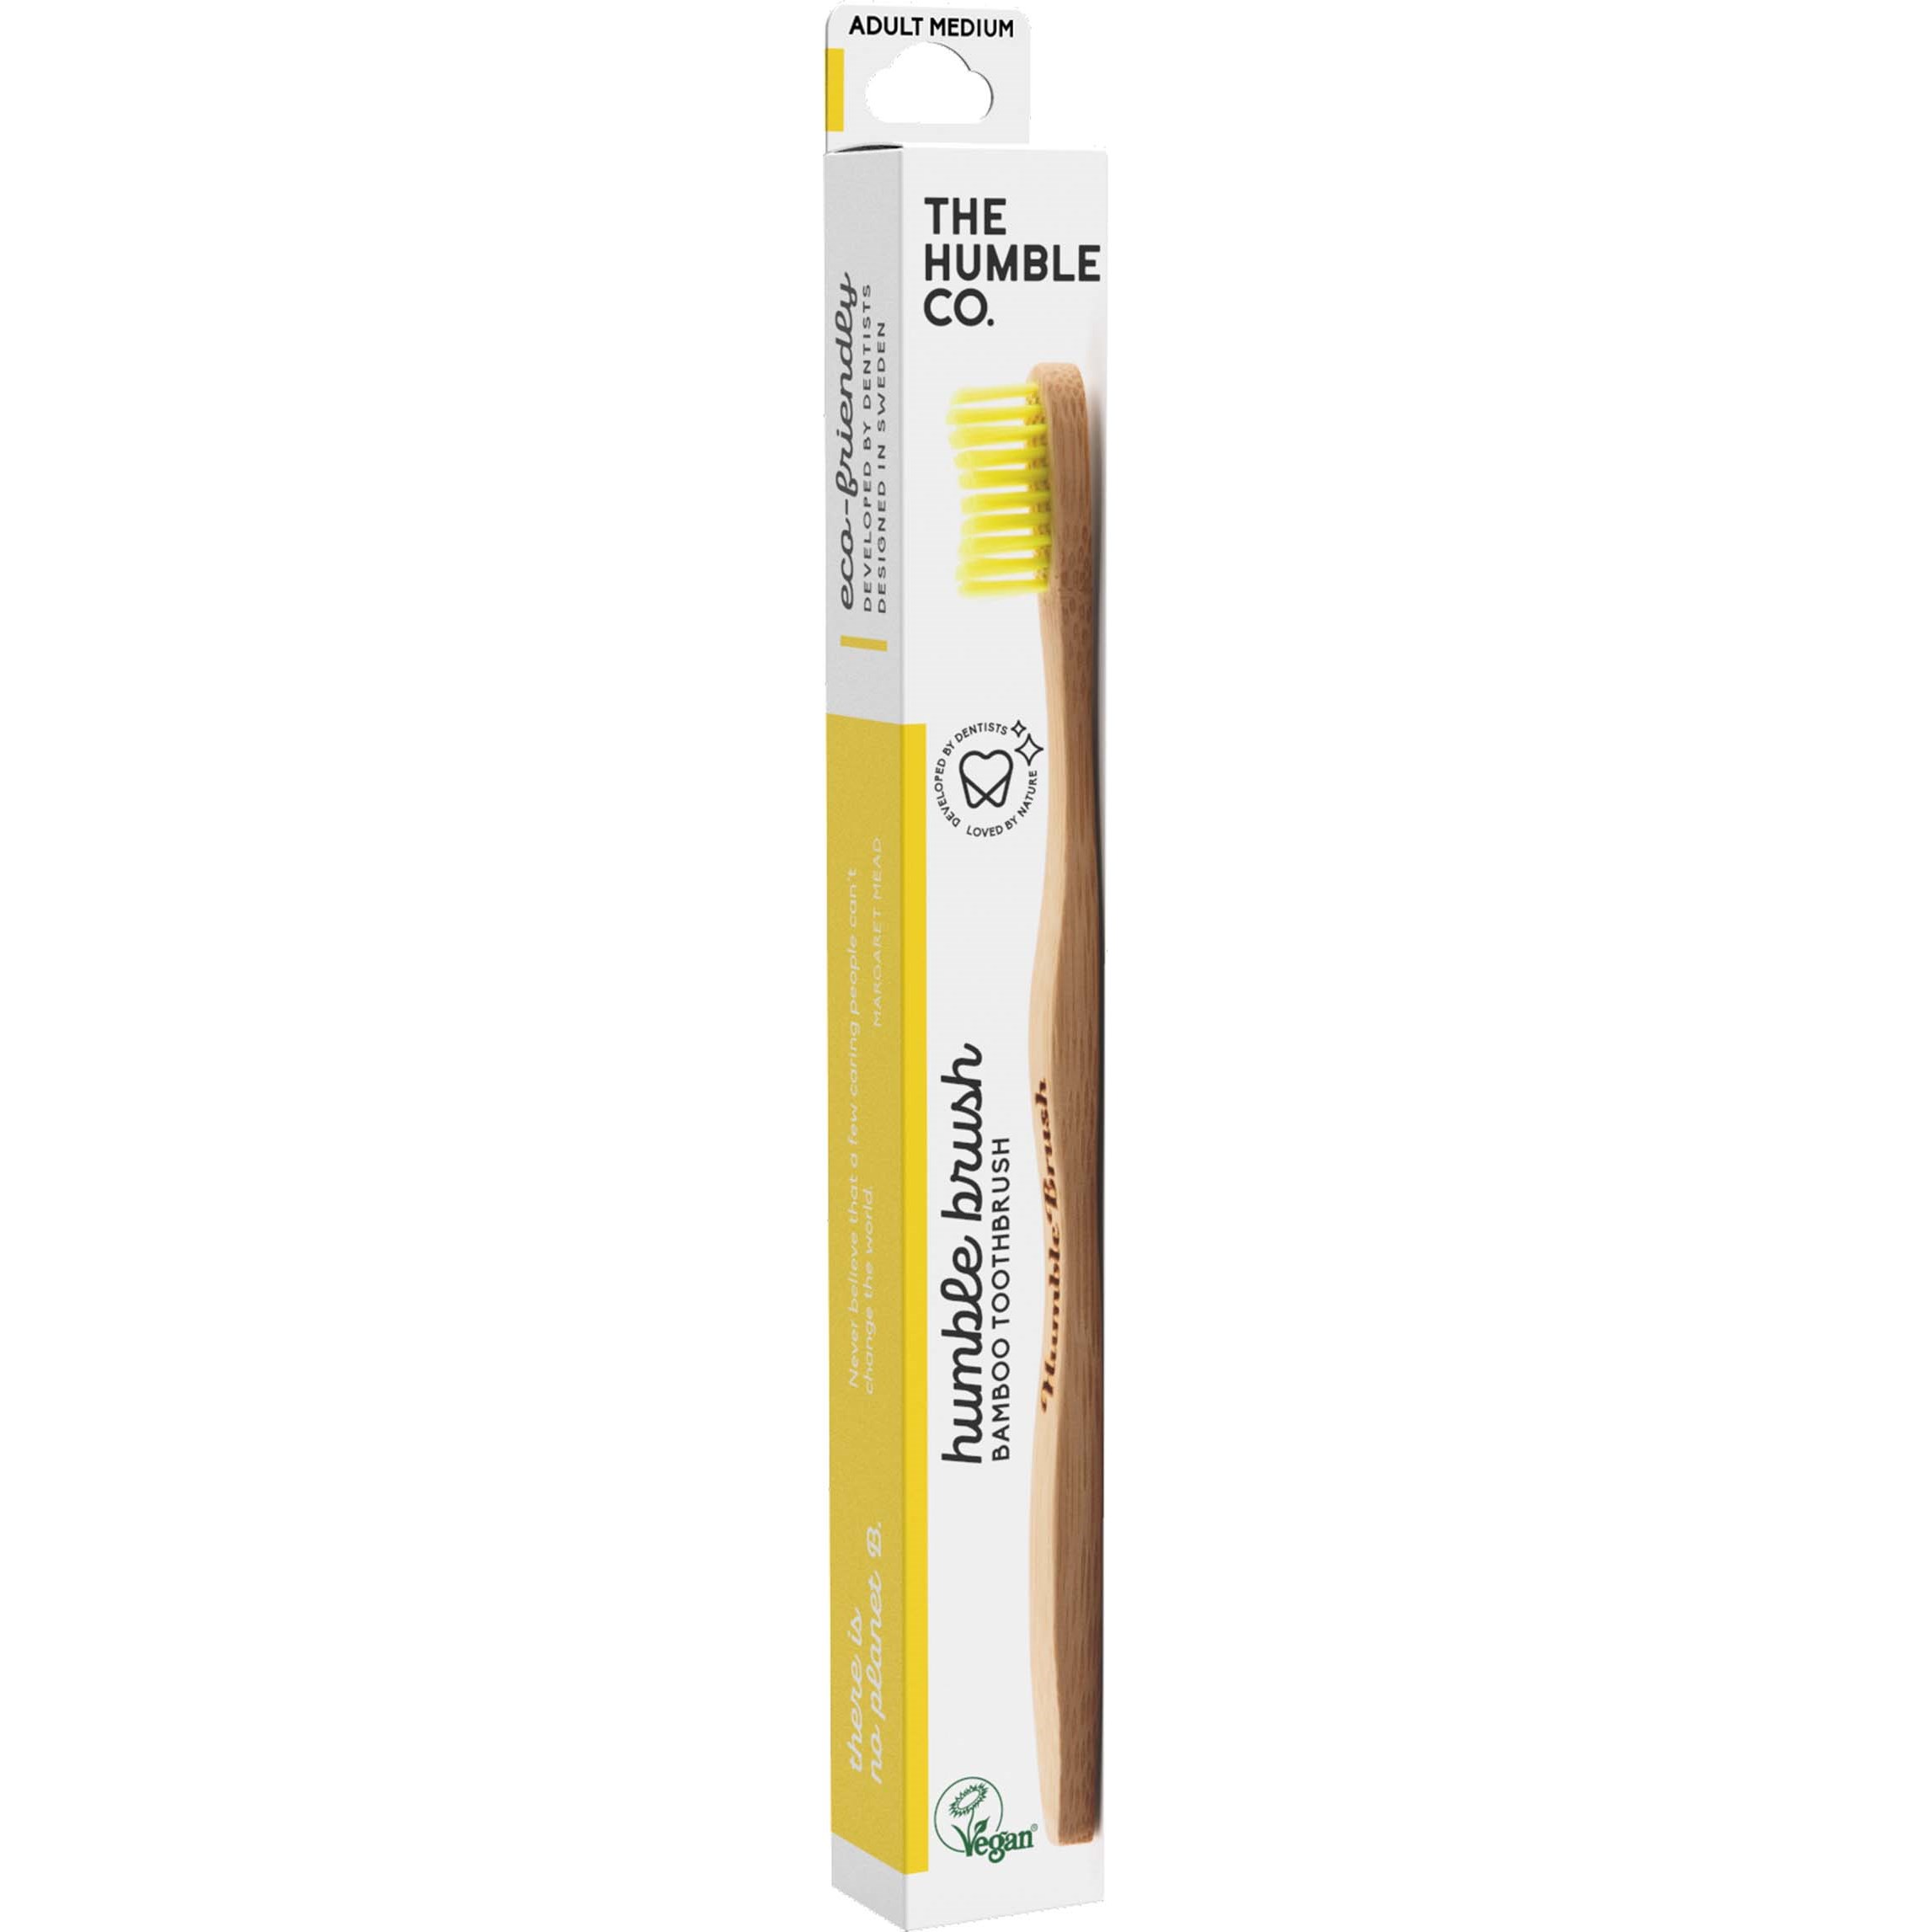 The Humble Co. Bamboo Toothbrush Adult Medium Yellow